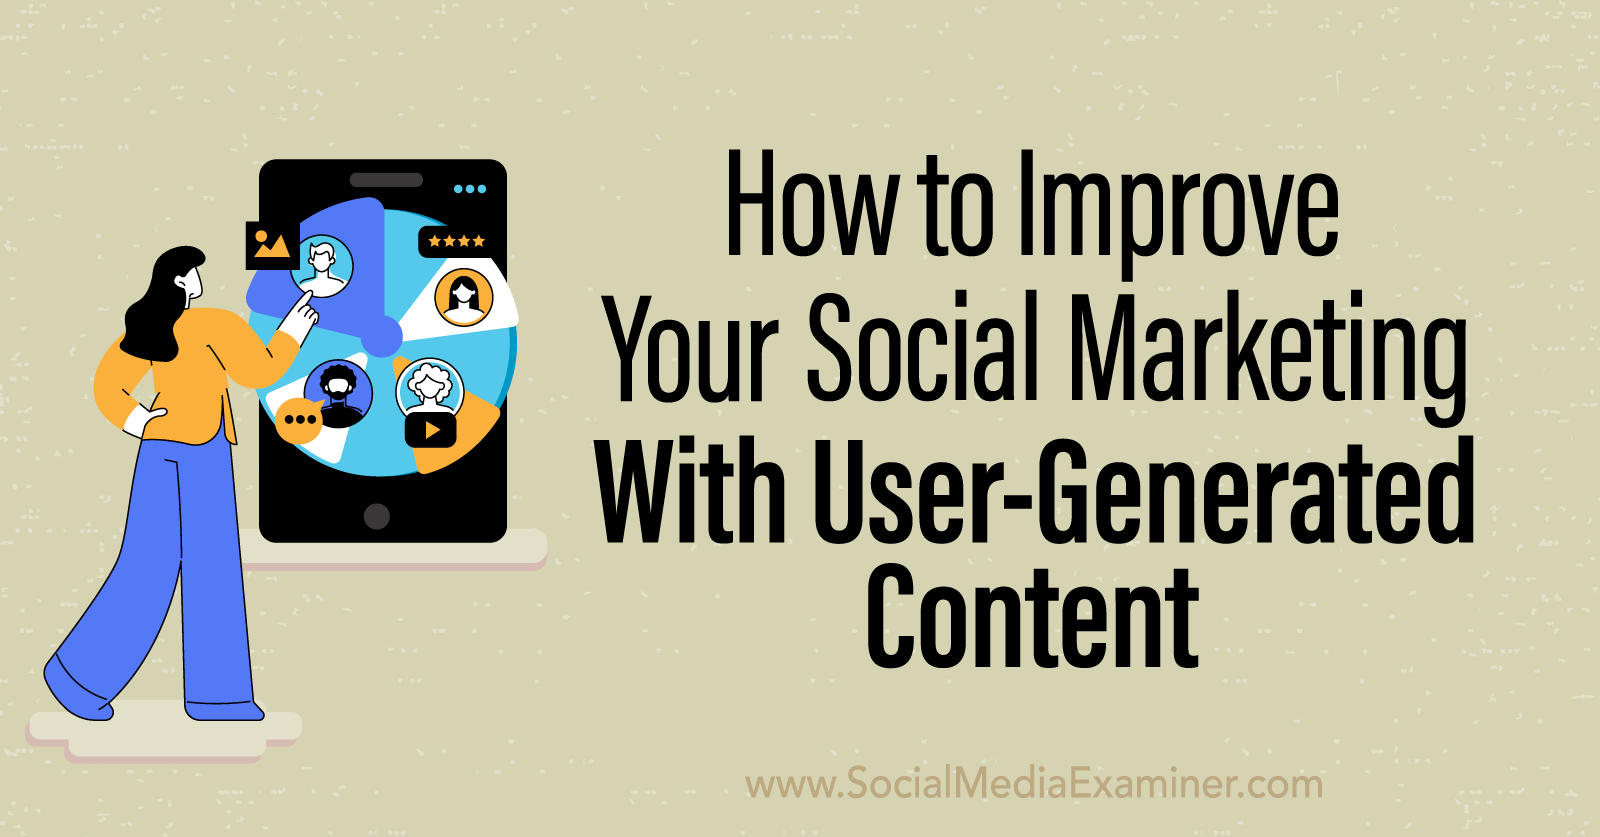 How to Improve Your Social Marketing With User-Generated Content by Social Media Examiner